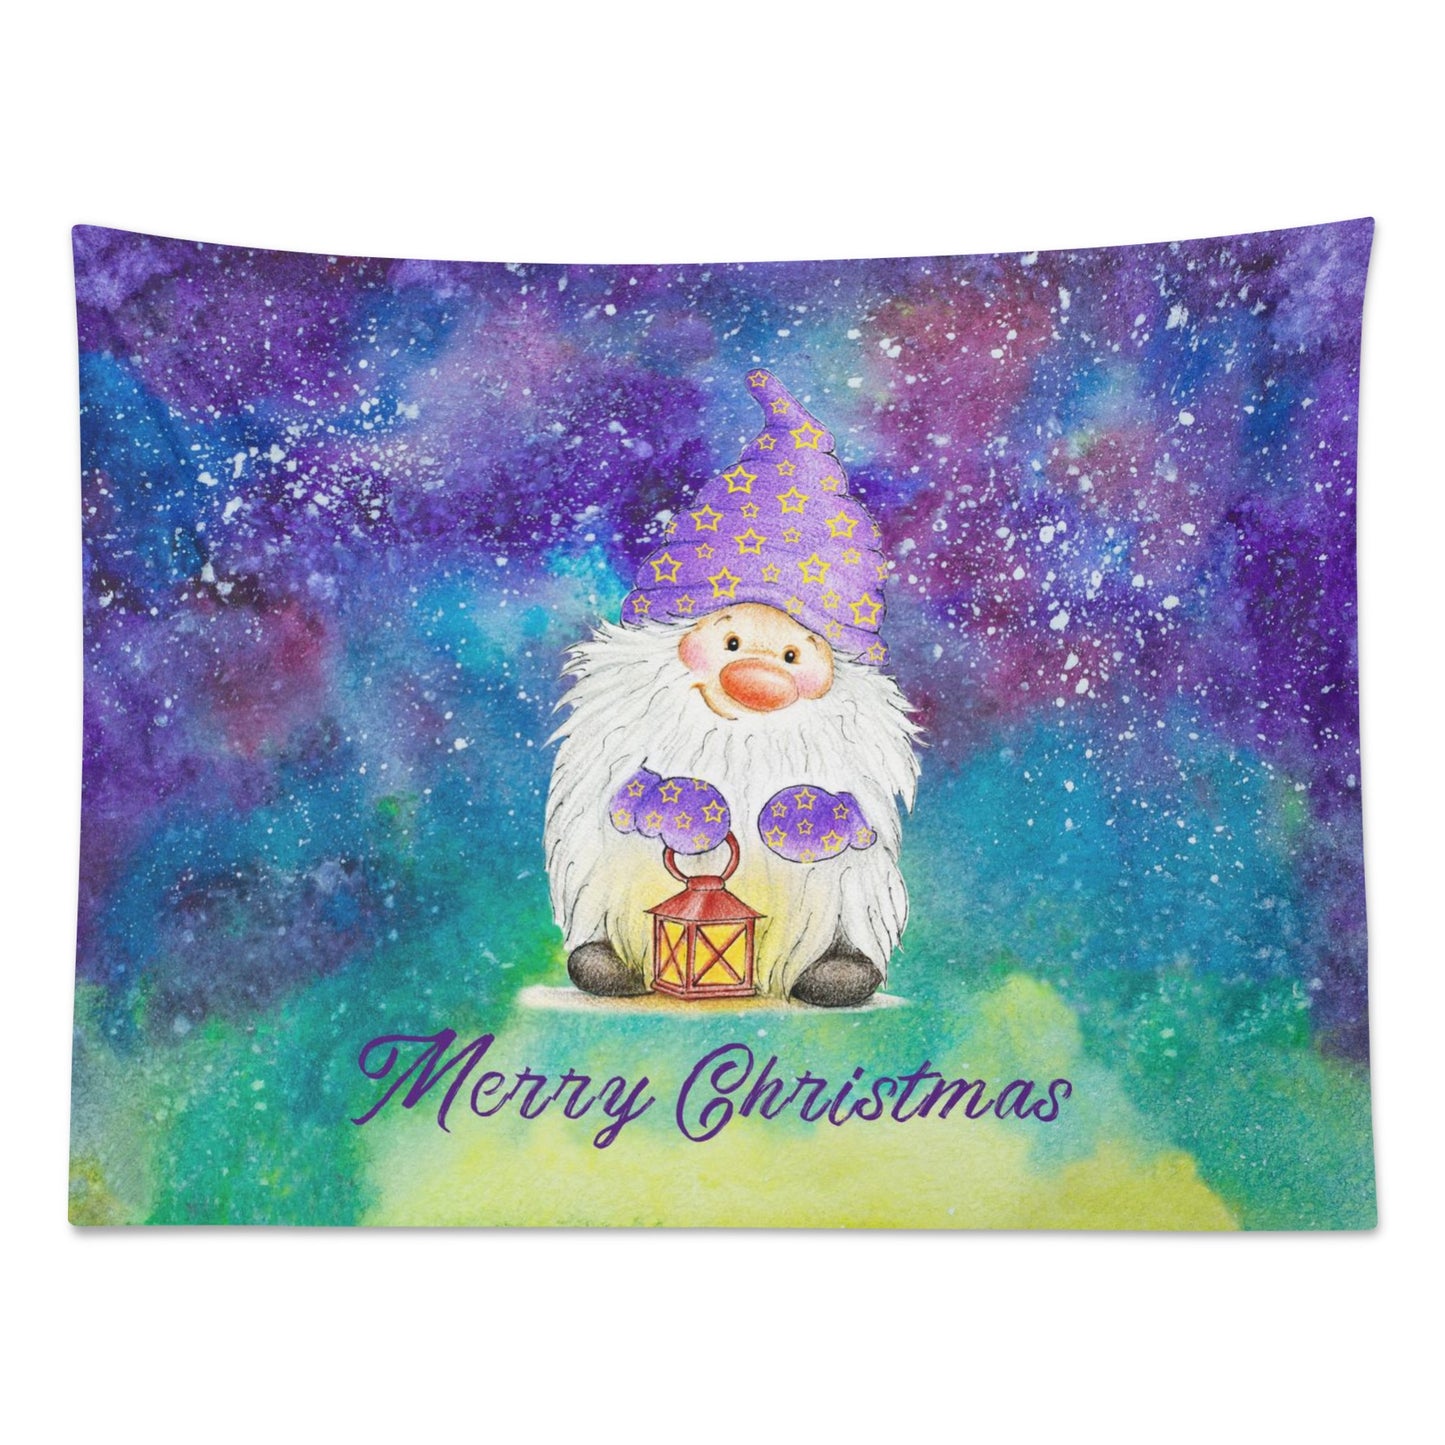 Gnomes for Christmas Polyester Peach Skin Wall Tapestry 6 Sizes